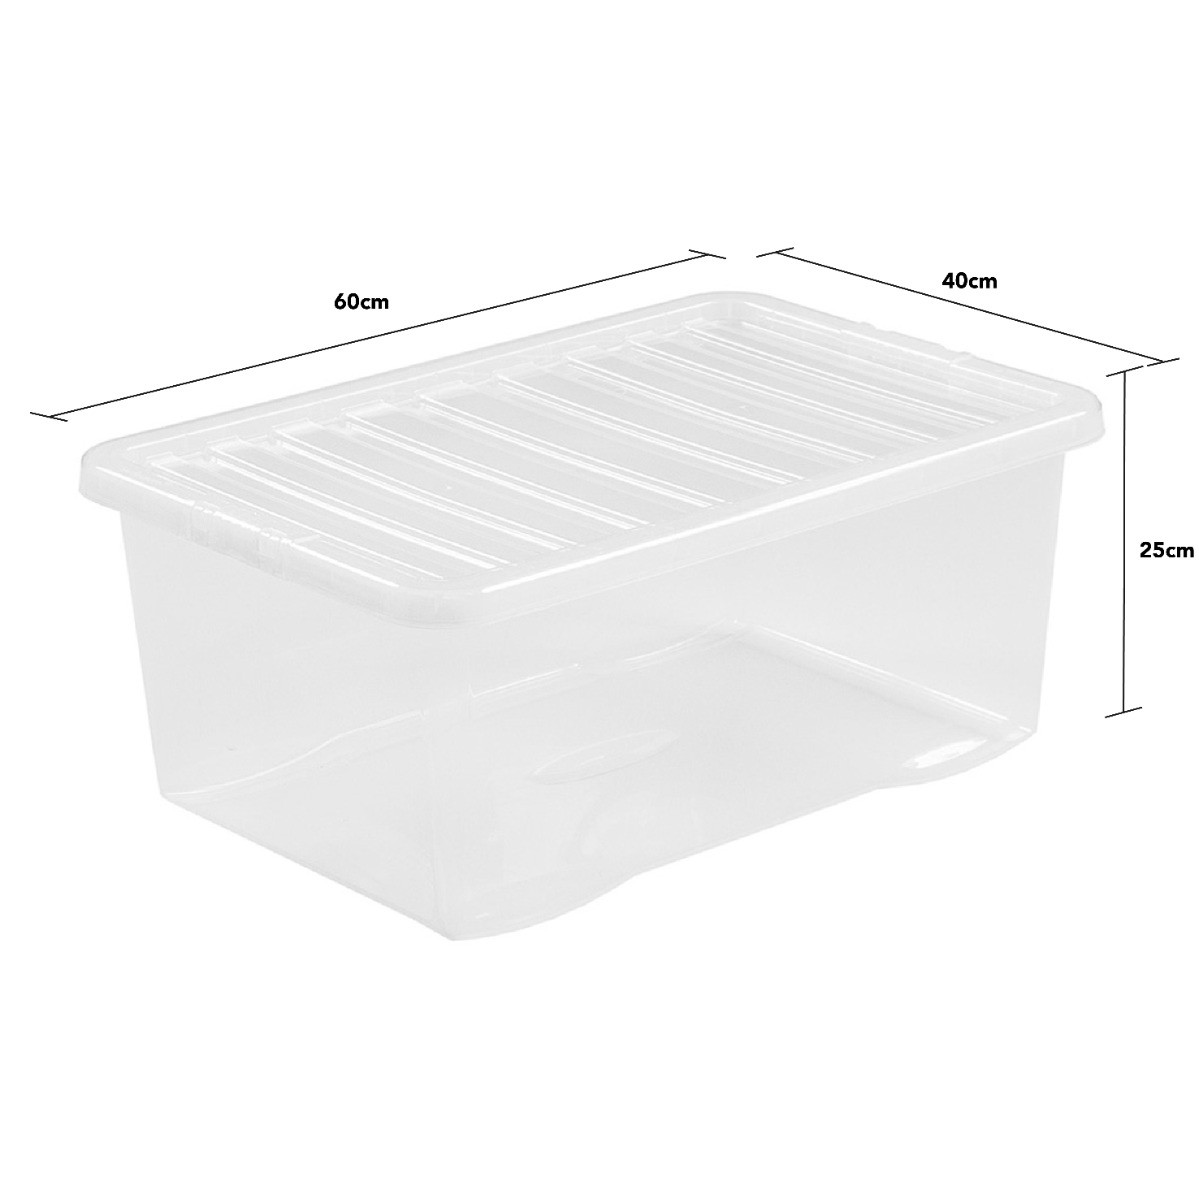 Wham Crystal Stackable Plastic Storage Box & Lid, Clear - 45 Litre